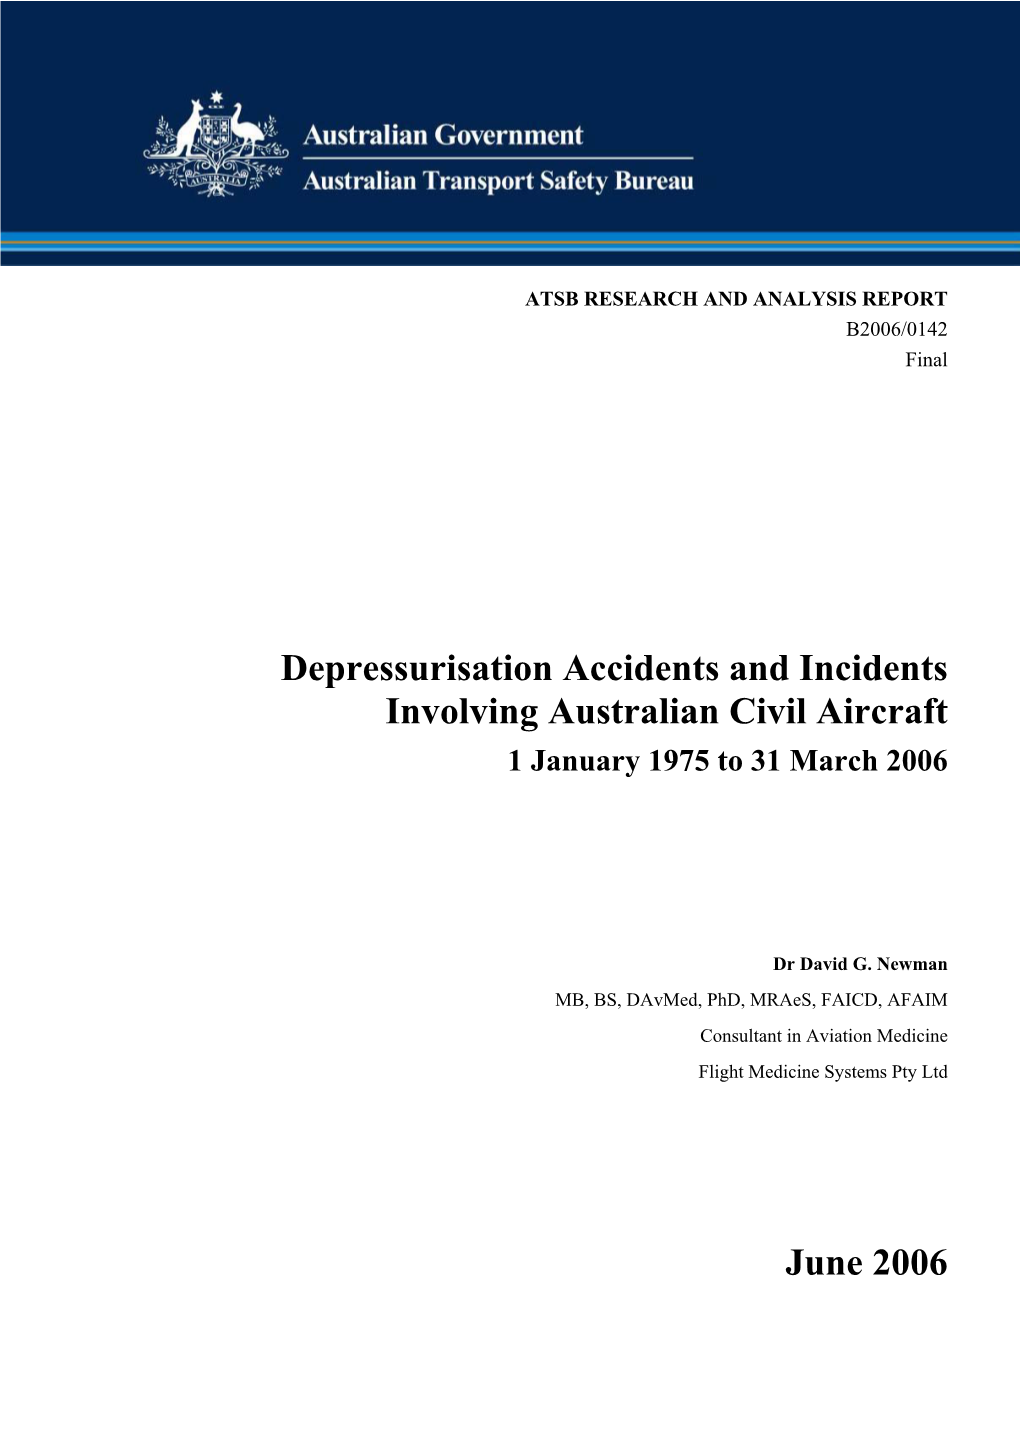 Aviation Research and Analysis Report B20060142